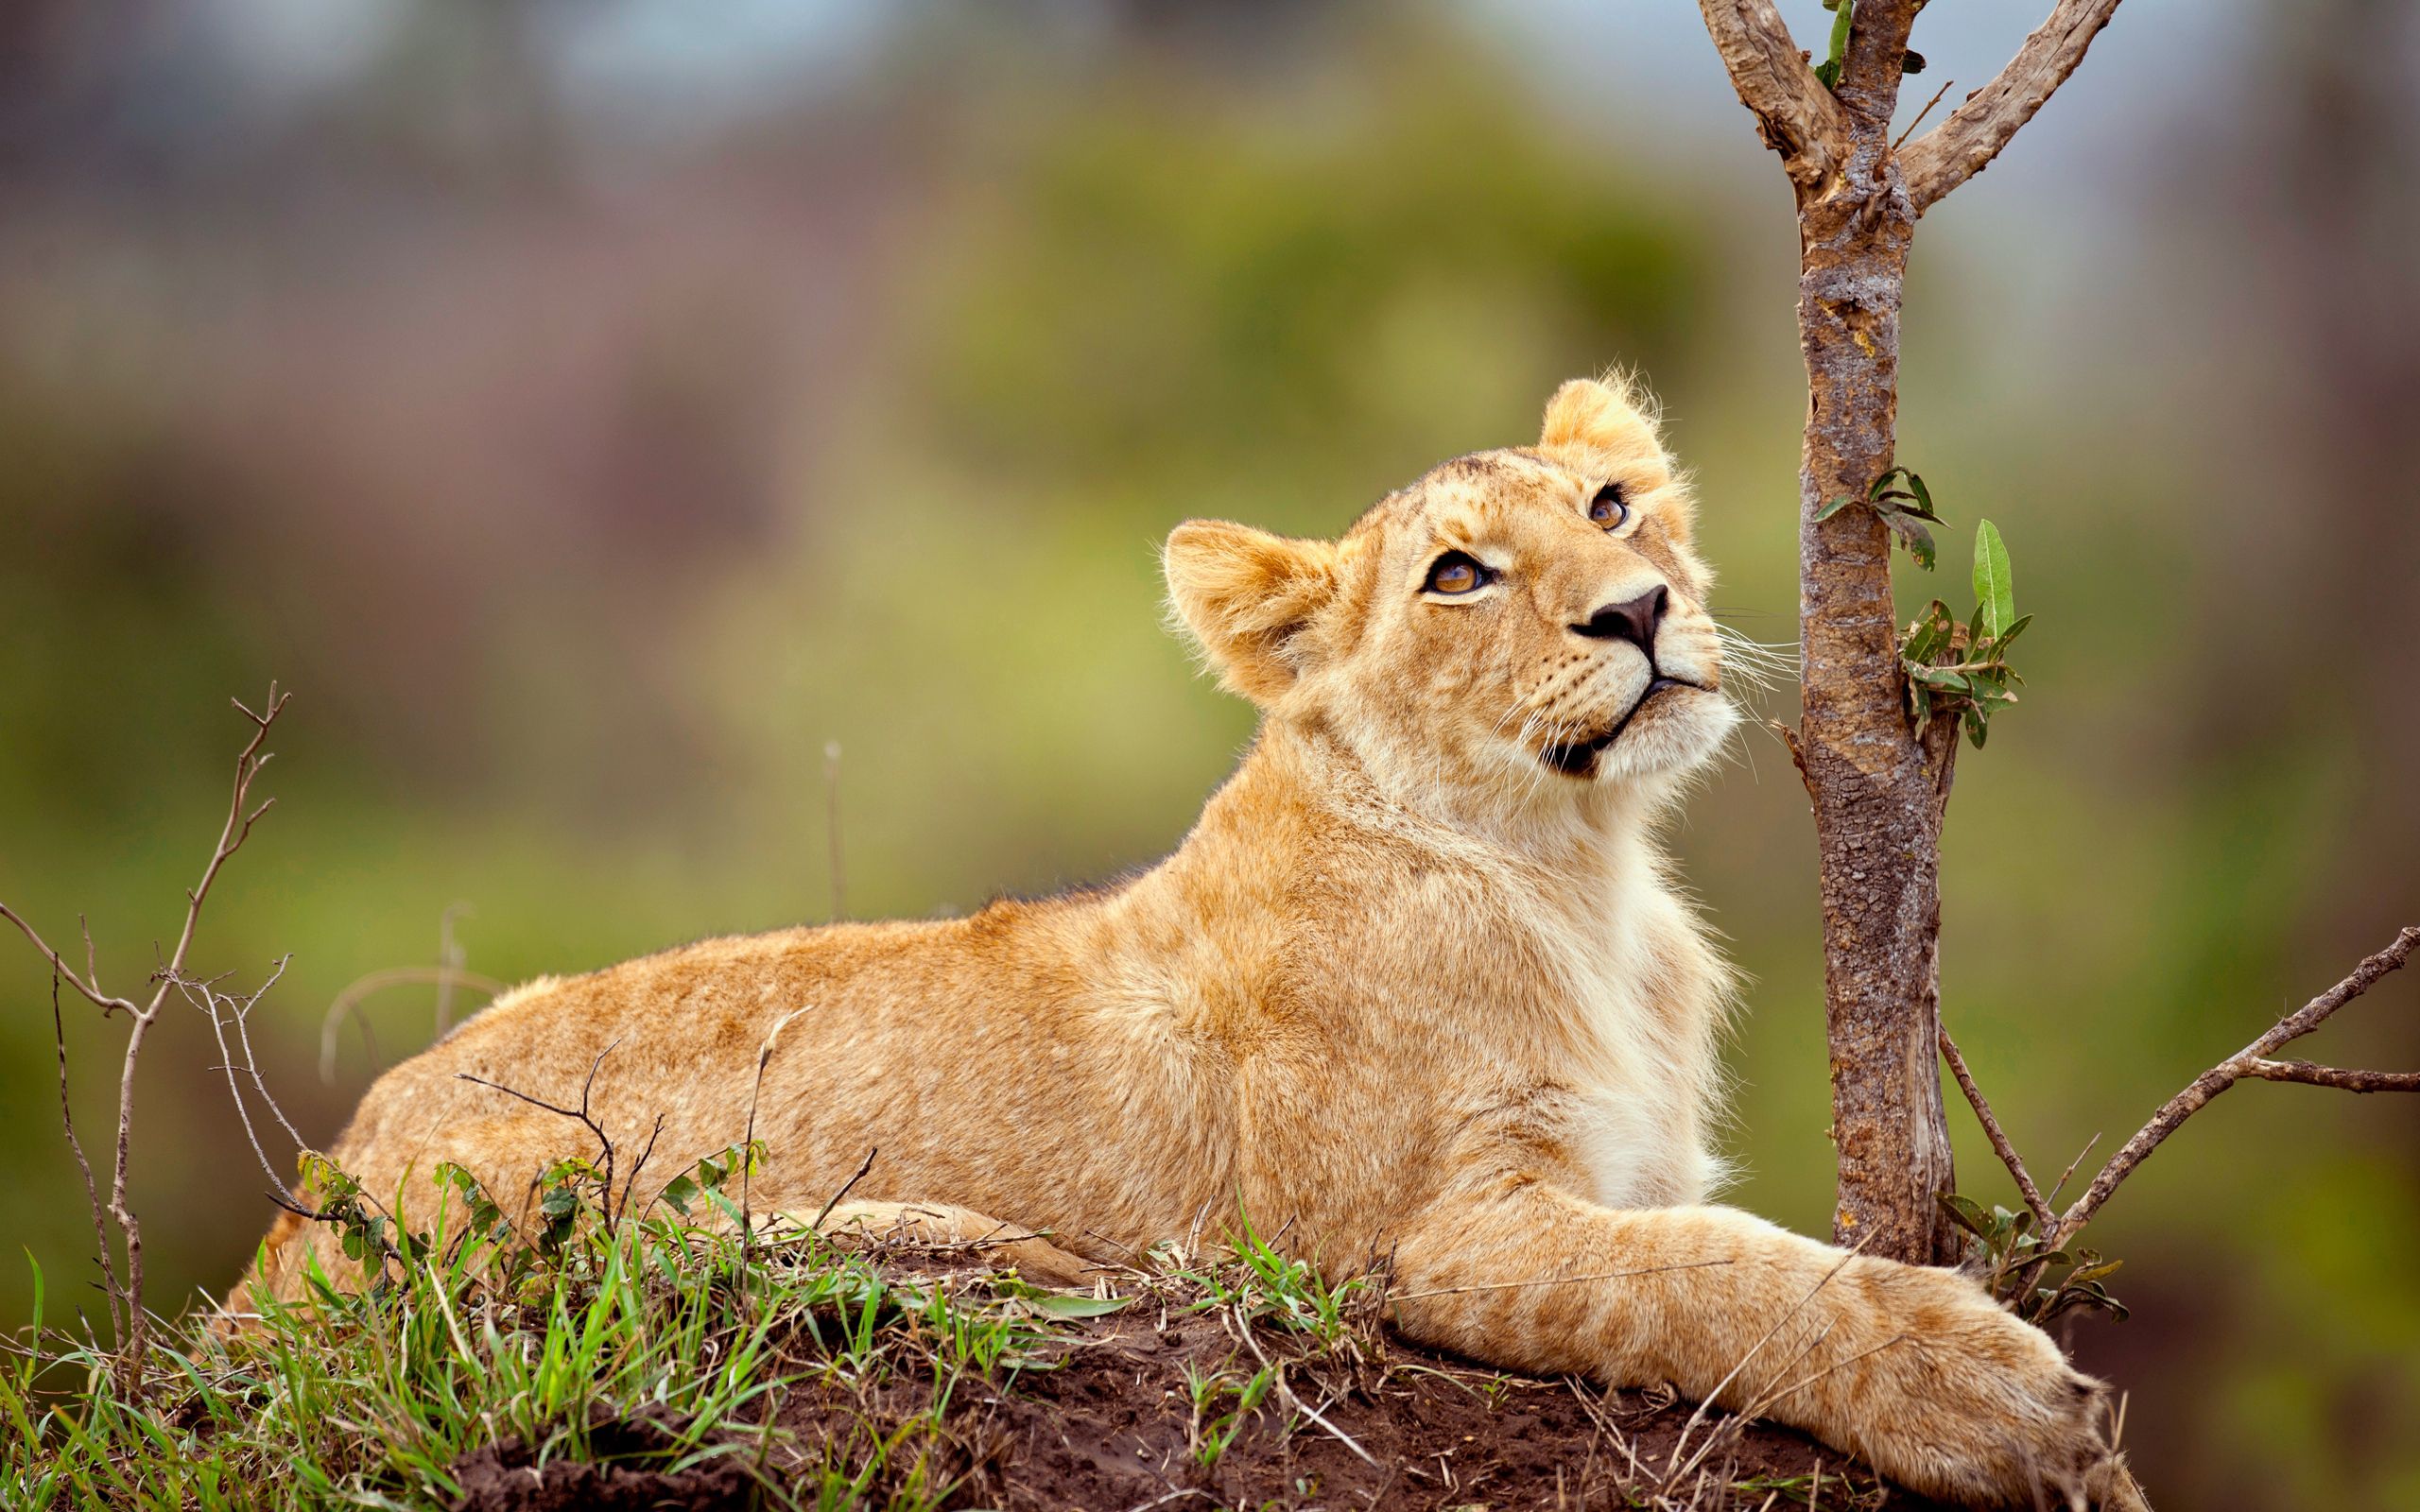 joey, animals, grass, young, to lie down, lie, branch, lion, lion cub 2160p